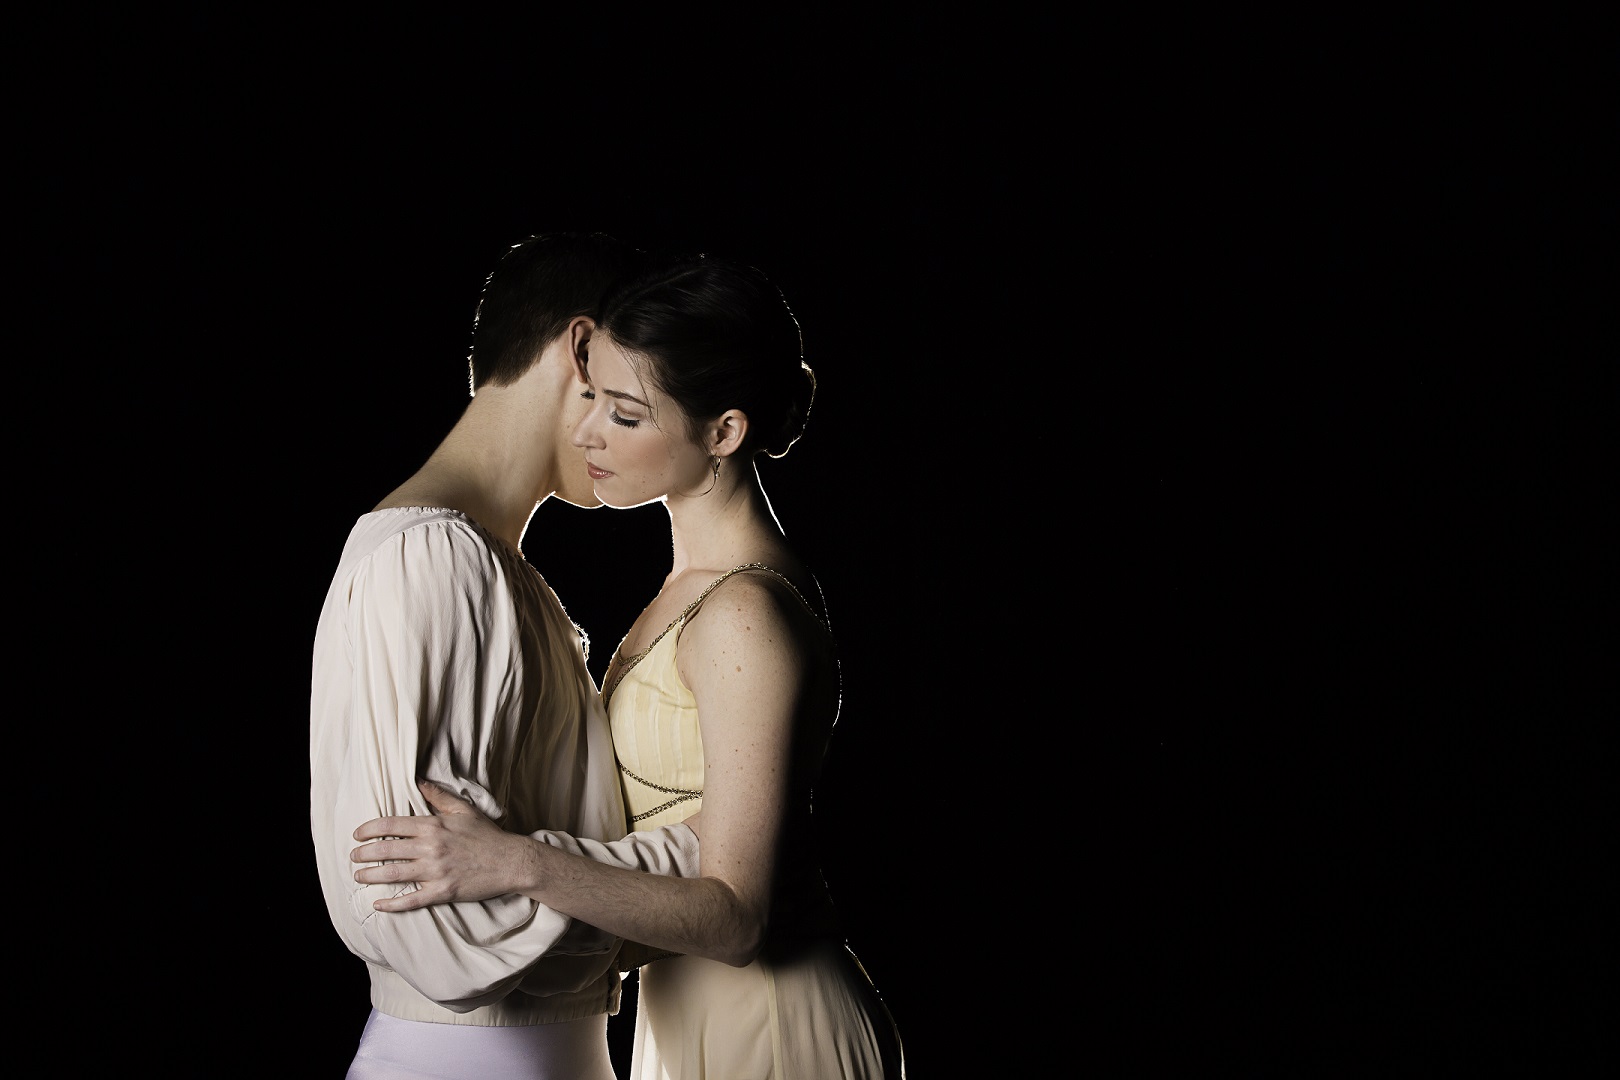 David Ward and Caitlin Valentine Ellis in a promo for Romeo and Juliet